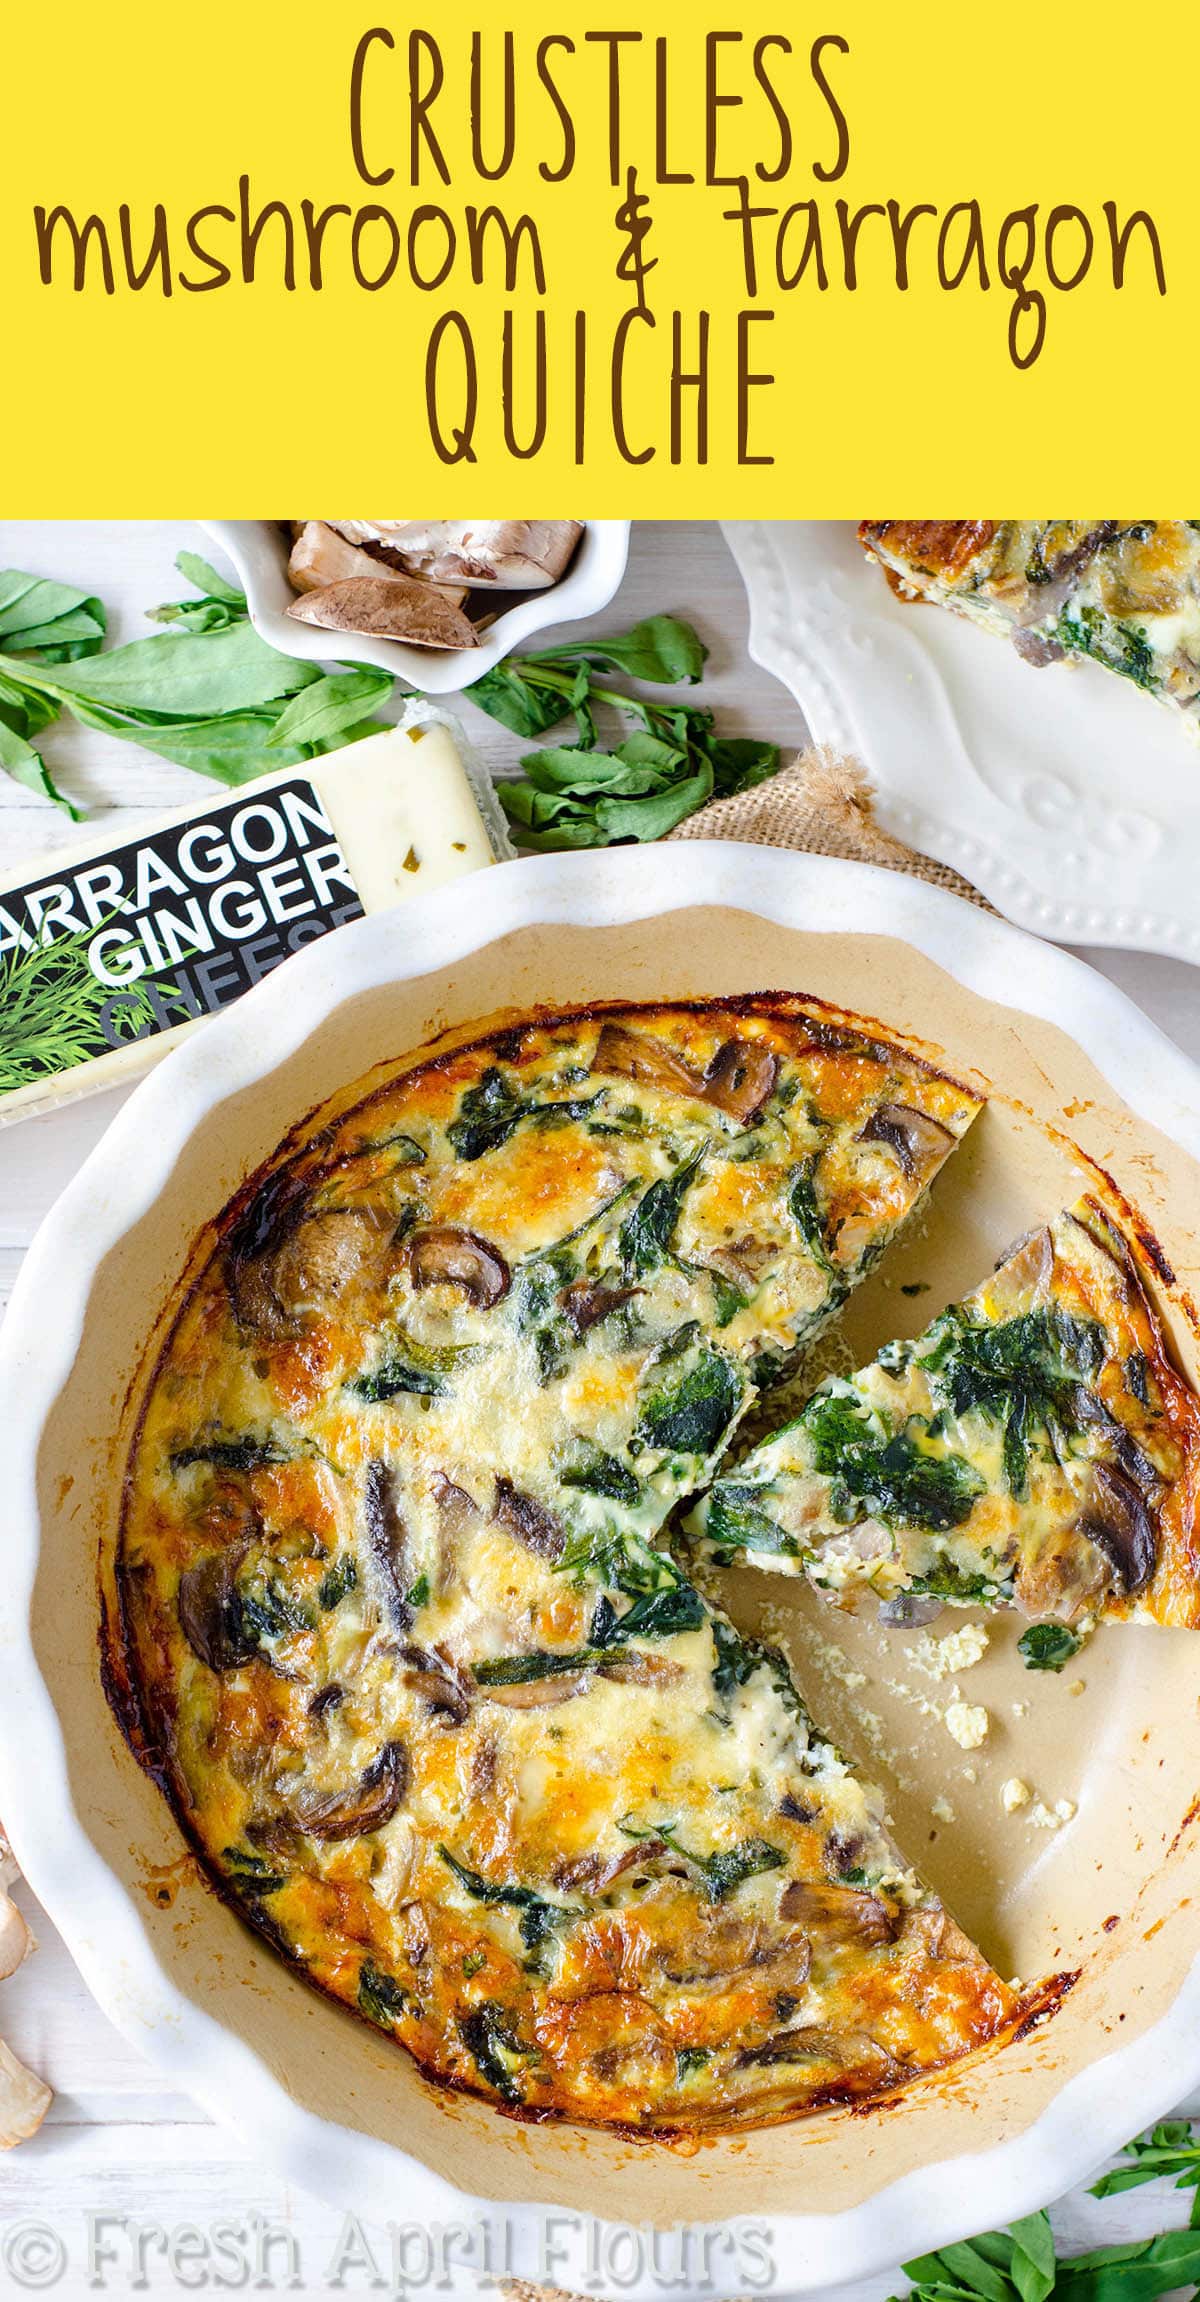 Crustless Mushroom & Tarragon Quiche: This incredibly flavorful quiche features earthy mushrooms, aromatic tarragon, and ultra creamy tarragon ginger cheese. Great for a hearty low-carb meal. via @frshaprilflours